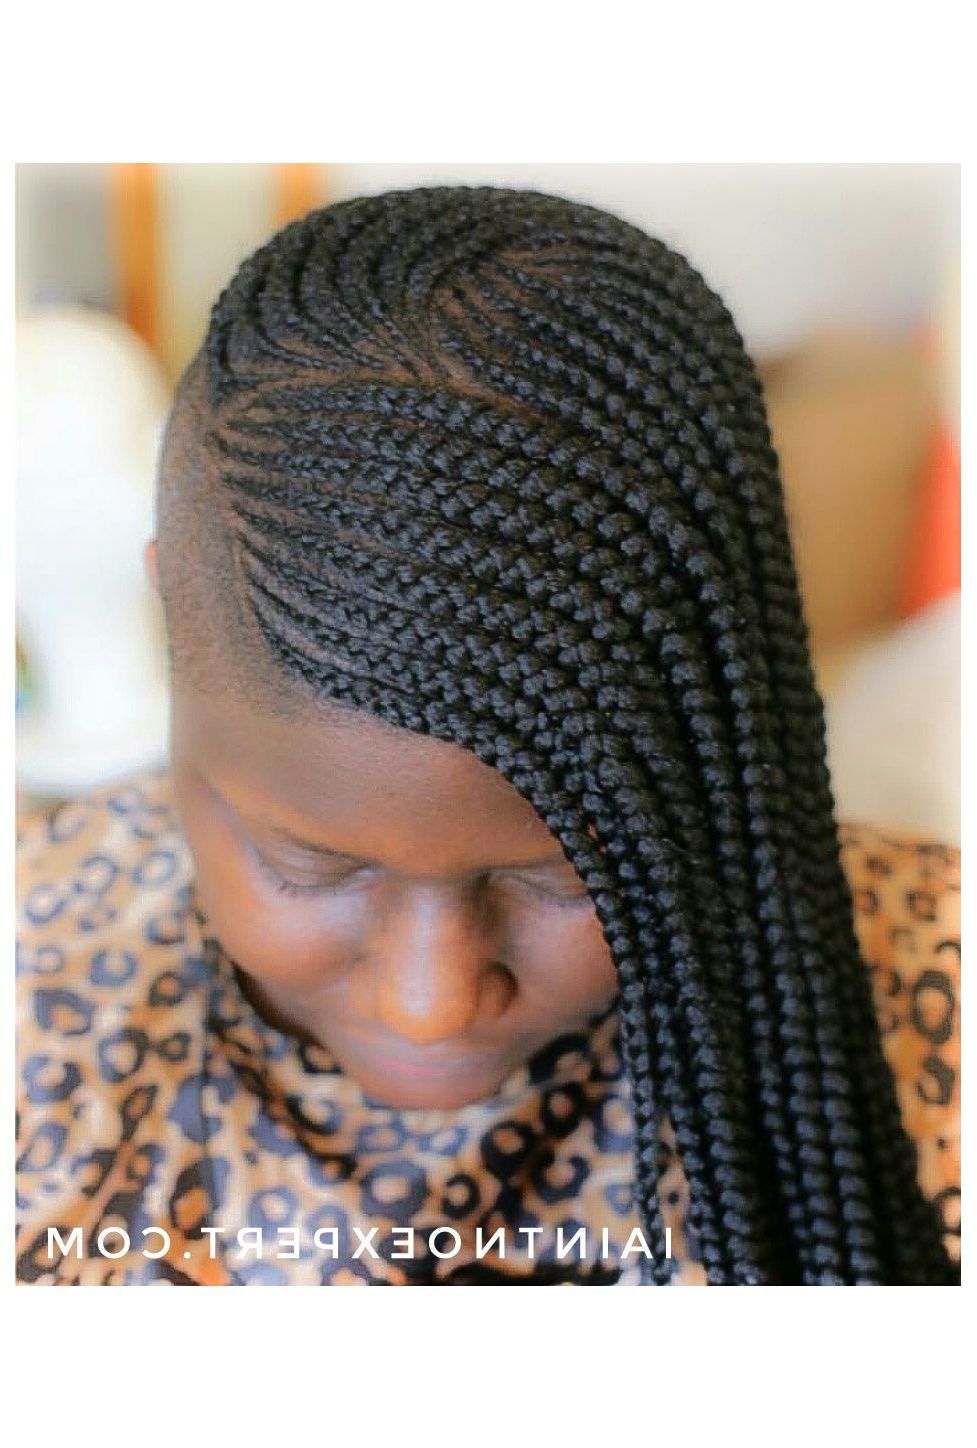 Most Recent Side Shaved Cornrows Braids Hairstyles Intended For Natural Hair, Shaved Sides, Protective Styles, Braids (View 13 of 21)